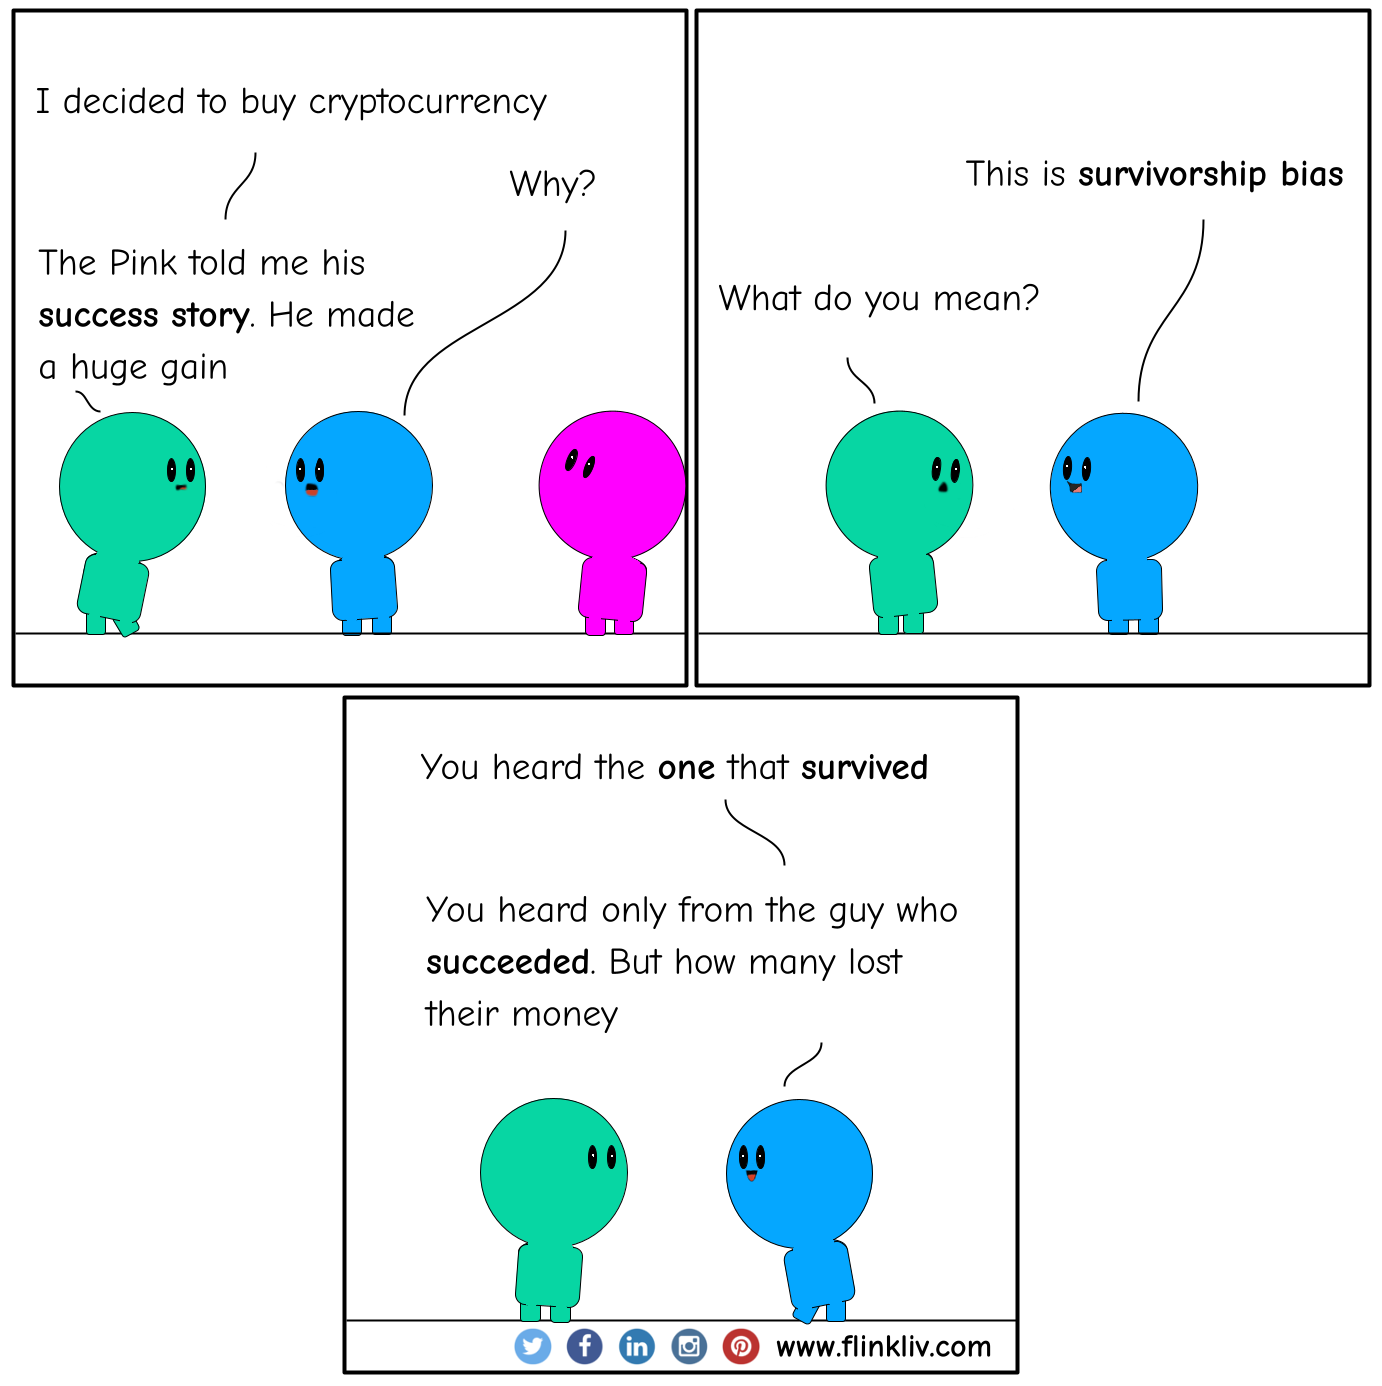 Conversation between A and B about  survivorship bias. 
              A: I decided to buy cryptocurrency
              B: Why?
              A: The Pink told me his success story. He made a huge gain
              B: This is survivorship bias
              A: What do you mean?
              B: You heard the one that survived. You heard only from the guy who succeeded. But how many lost their money